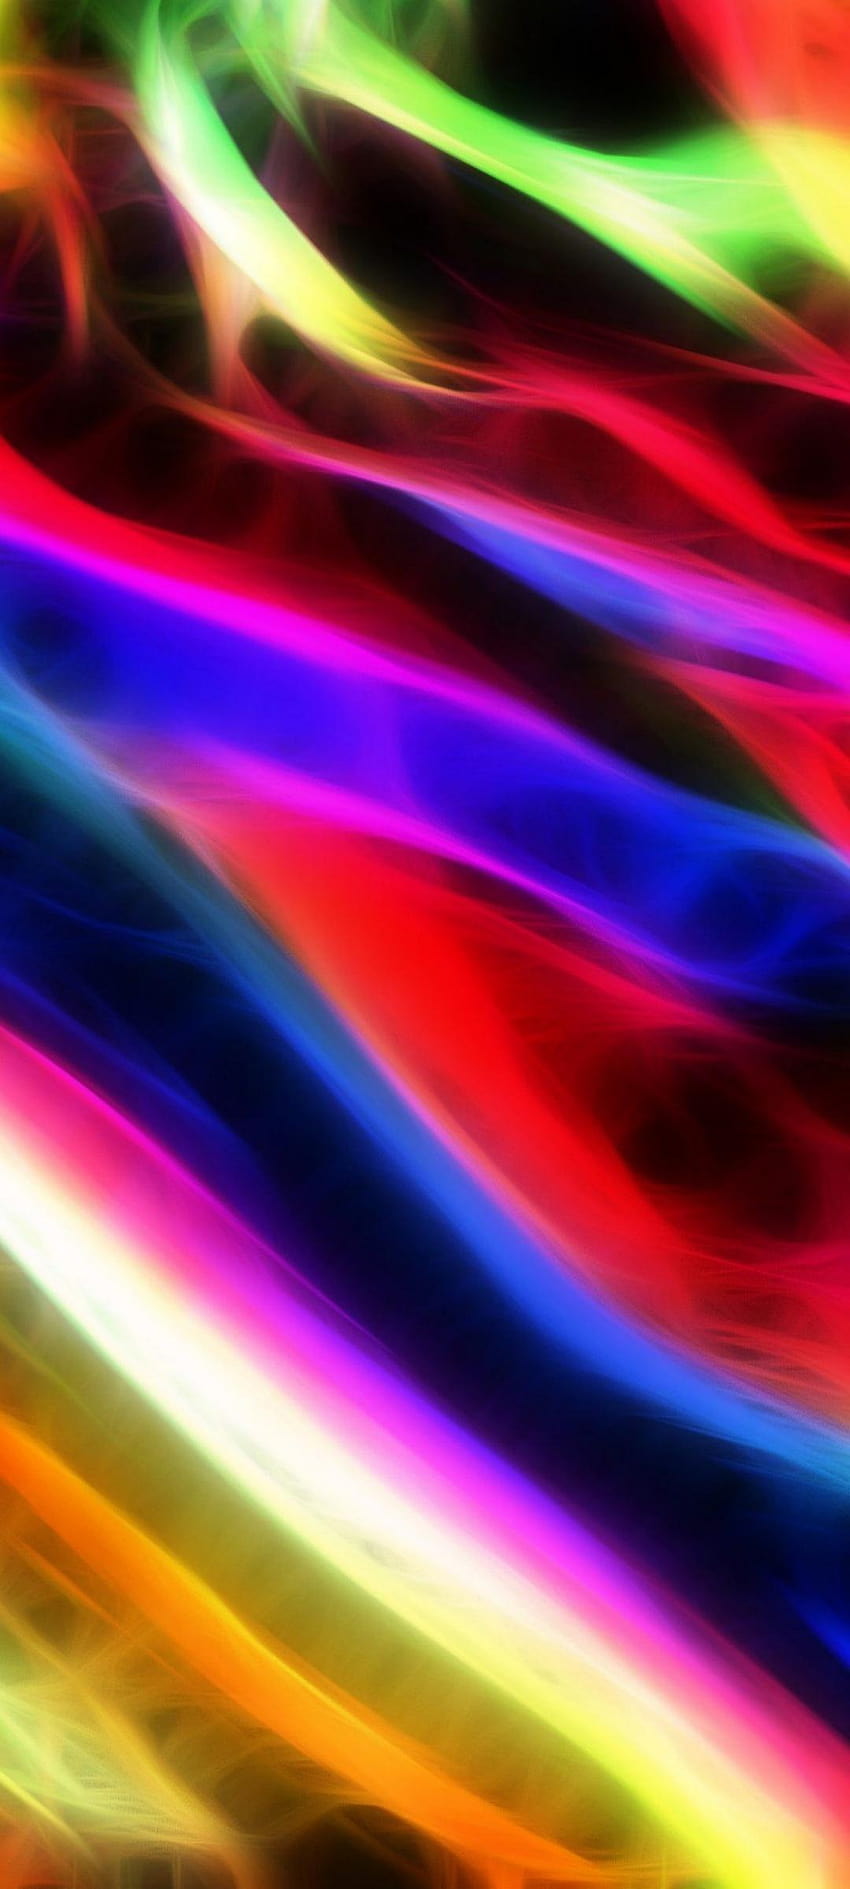 1080x2400 Backgrounds abstract. 1080x2400, 1080x2400 full mobile HD phone wallpaper